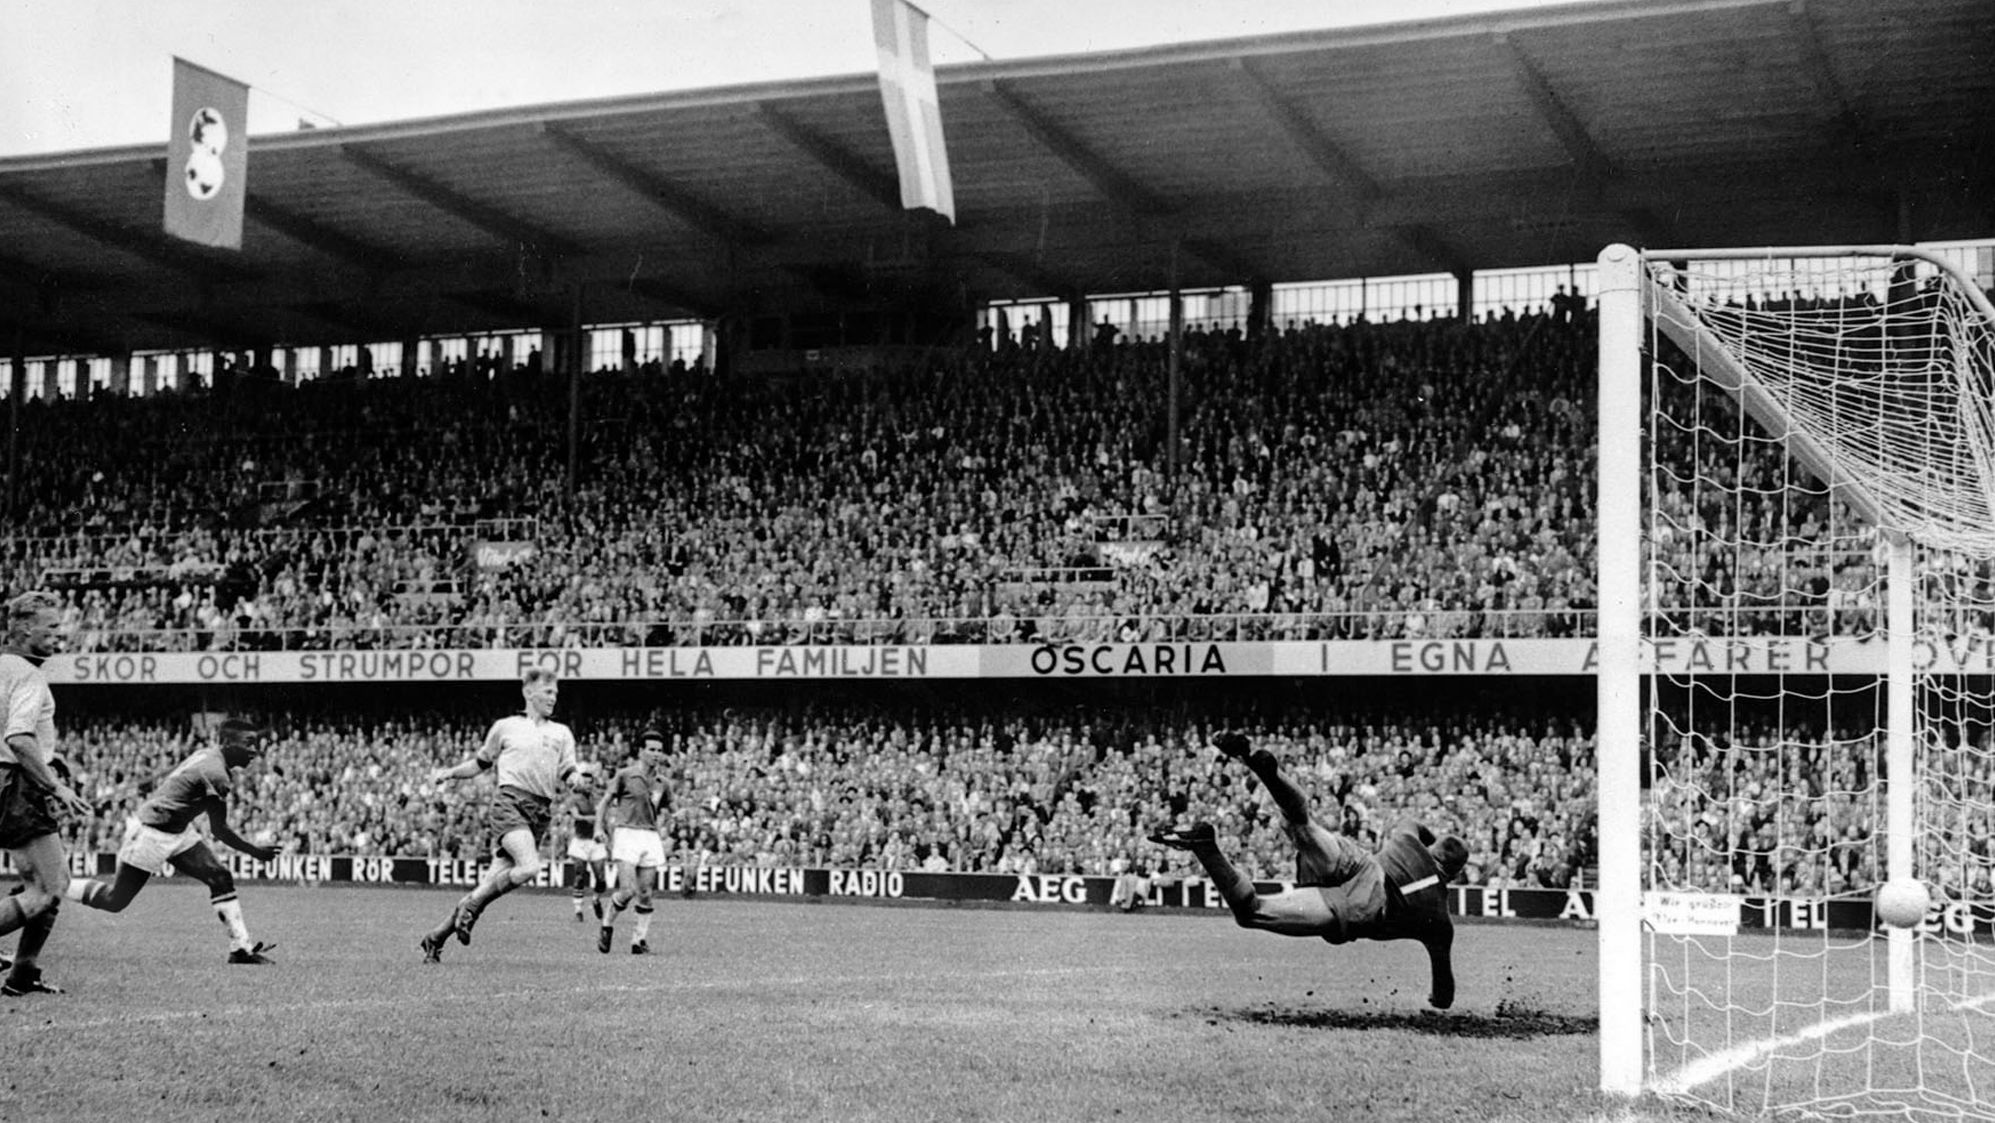 Pelé scores Brazil's third goal during the 1958 World Cup final against Sweden. Brazil won 5-2 to claim its first-ever World Cup. "When we won the World Cup, everybody knew about Brazil," he told CNN's Don Riddell many years later. "I think this was the most important thing I gave to my country because we were well known after that World Cup." 